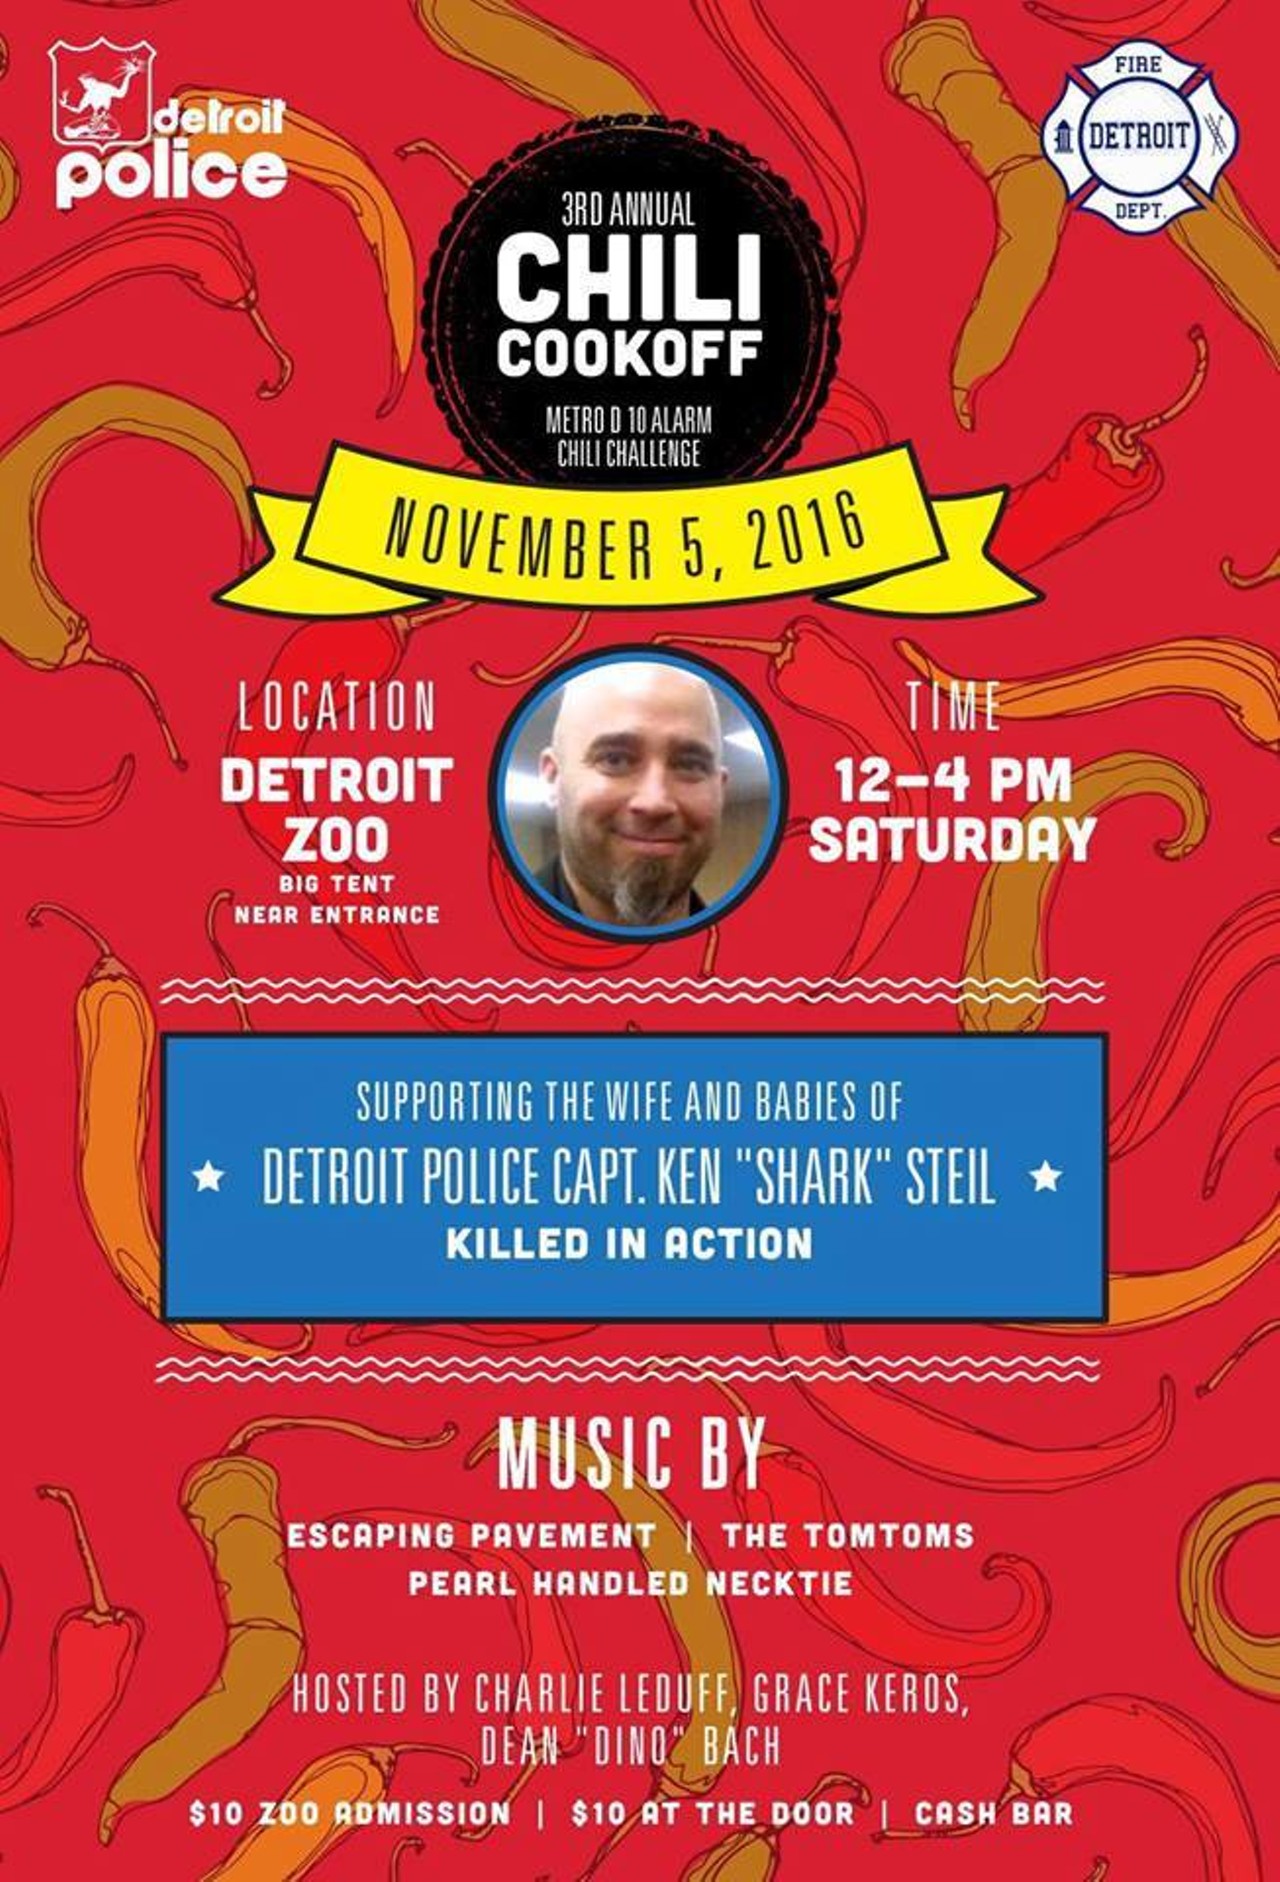 Saturday, 11/5
10 Alarm Chili Challenge
@ Detroit Zoo
Detroit Police Capt. Ken Steil was killed in the line of duty in September, and proceeds from this year's 10-Alarm Chili Challenge will help support his wife and children. The 10-Alarm Chili Challenge includes an all-you-can-eat chili eating contest, live music, and a cash bar. Plus, it's at the zoo, so you'll have plenty of ways to enjoy yourselves and keep the kids busy.
The event starts at noon; 8450 W. 10 Mile Rd., Royal Oak; detroitzoo.org. Admission to the zoo is $10, and tent admission is an additional $10.